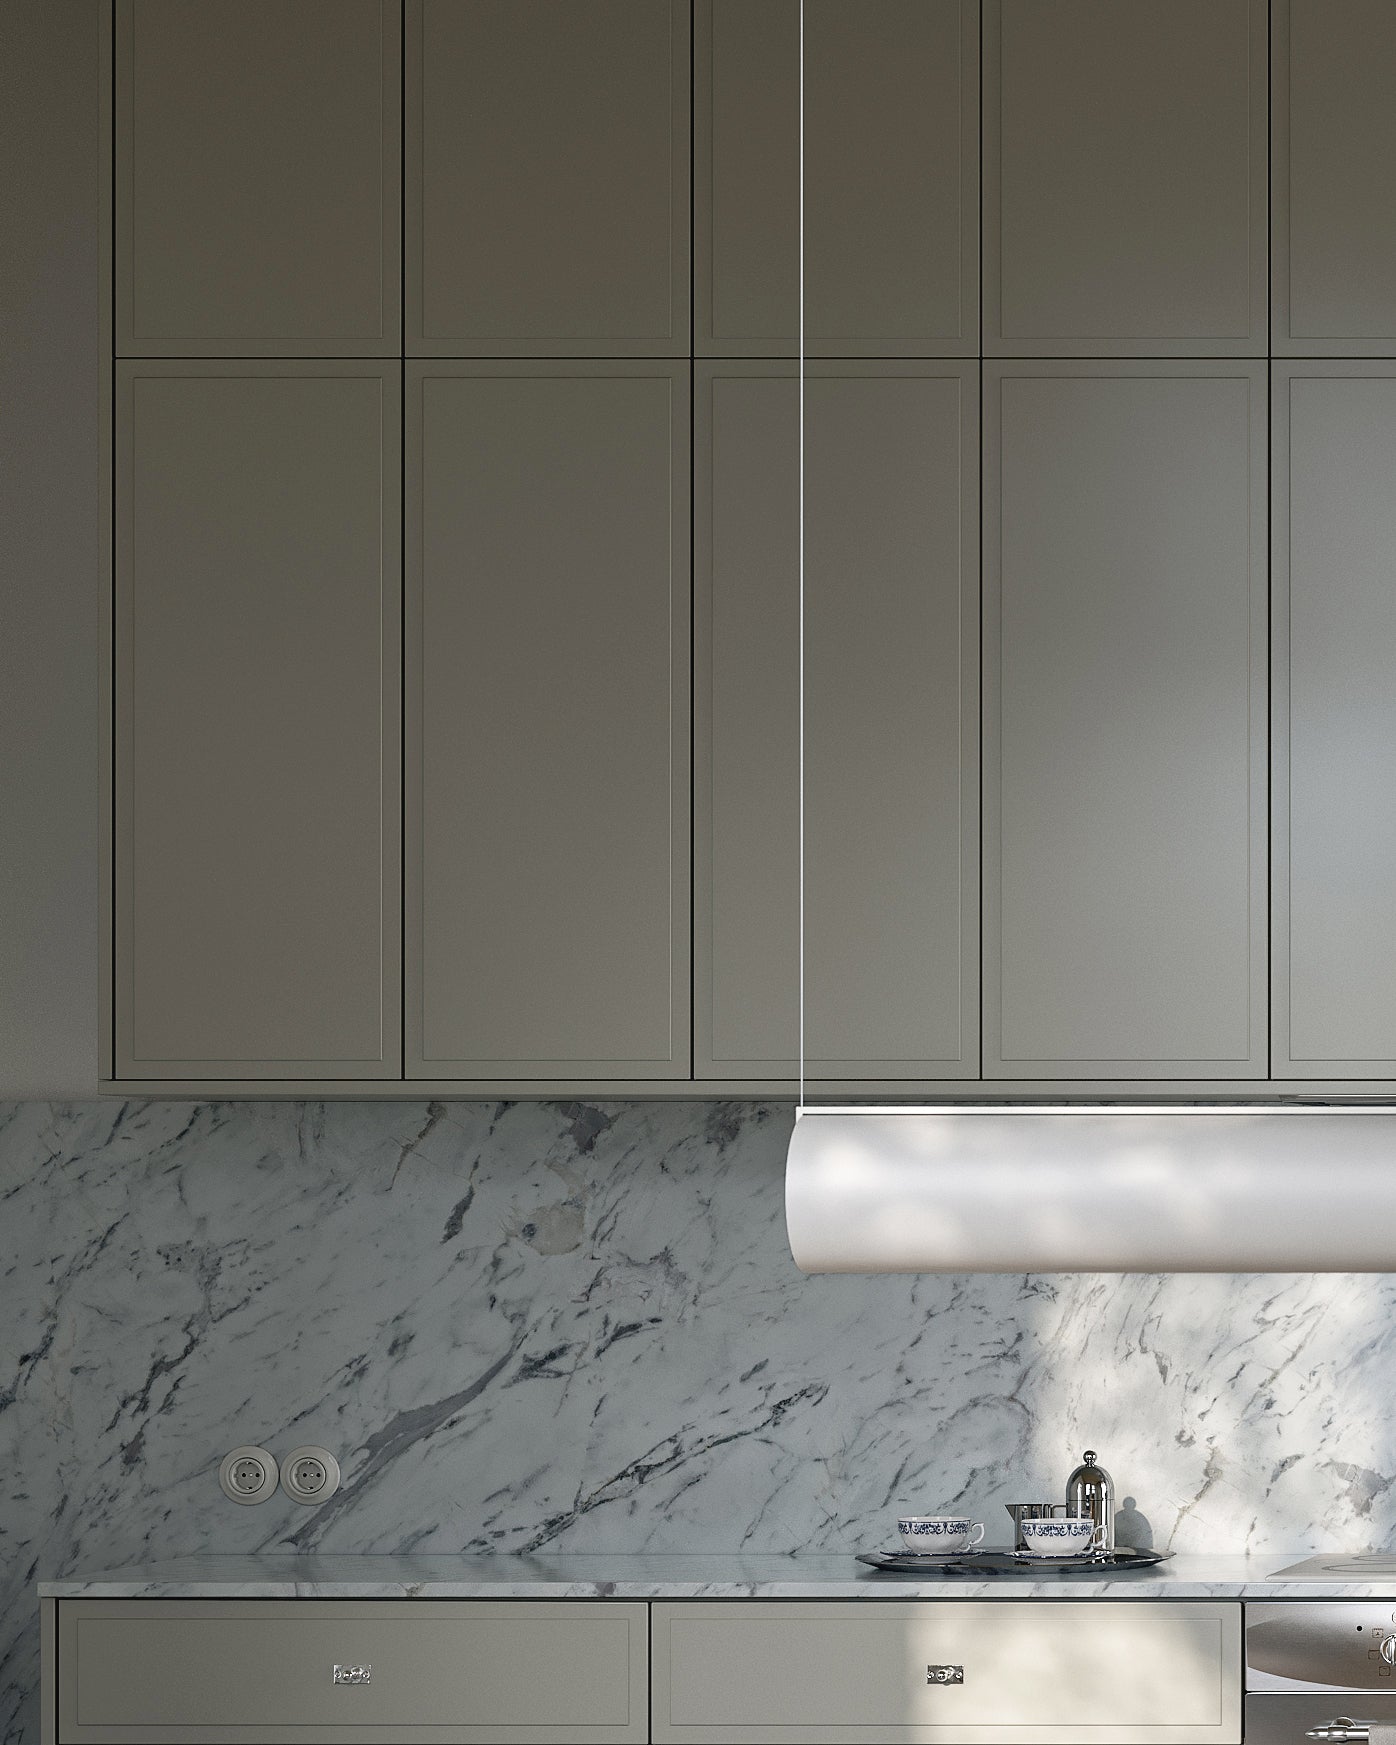 A.S.Helsingö Haga kitchen in amager grey colour and nickel-plated knobs